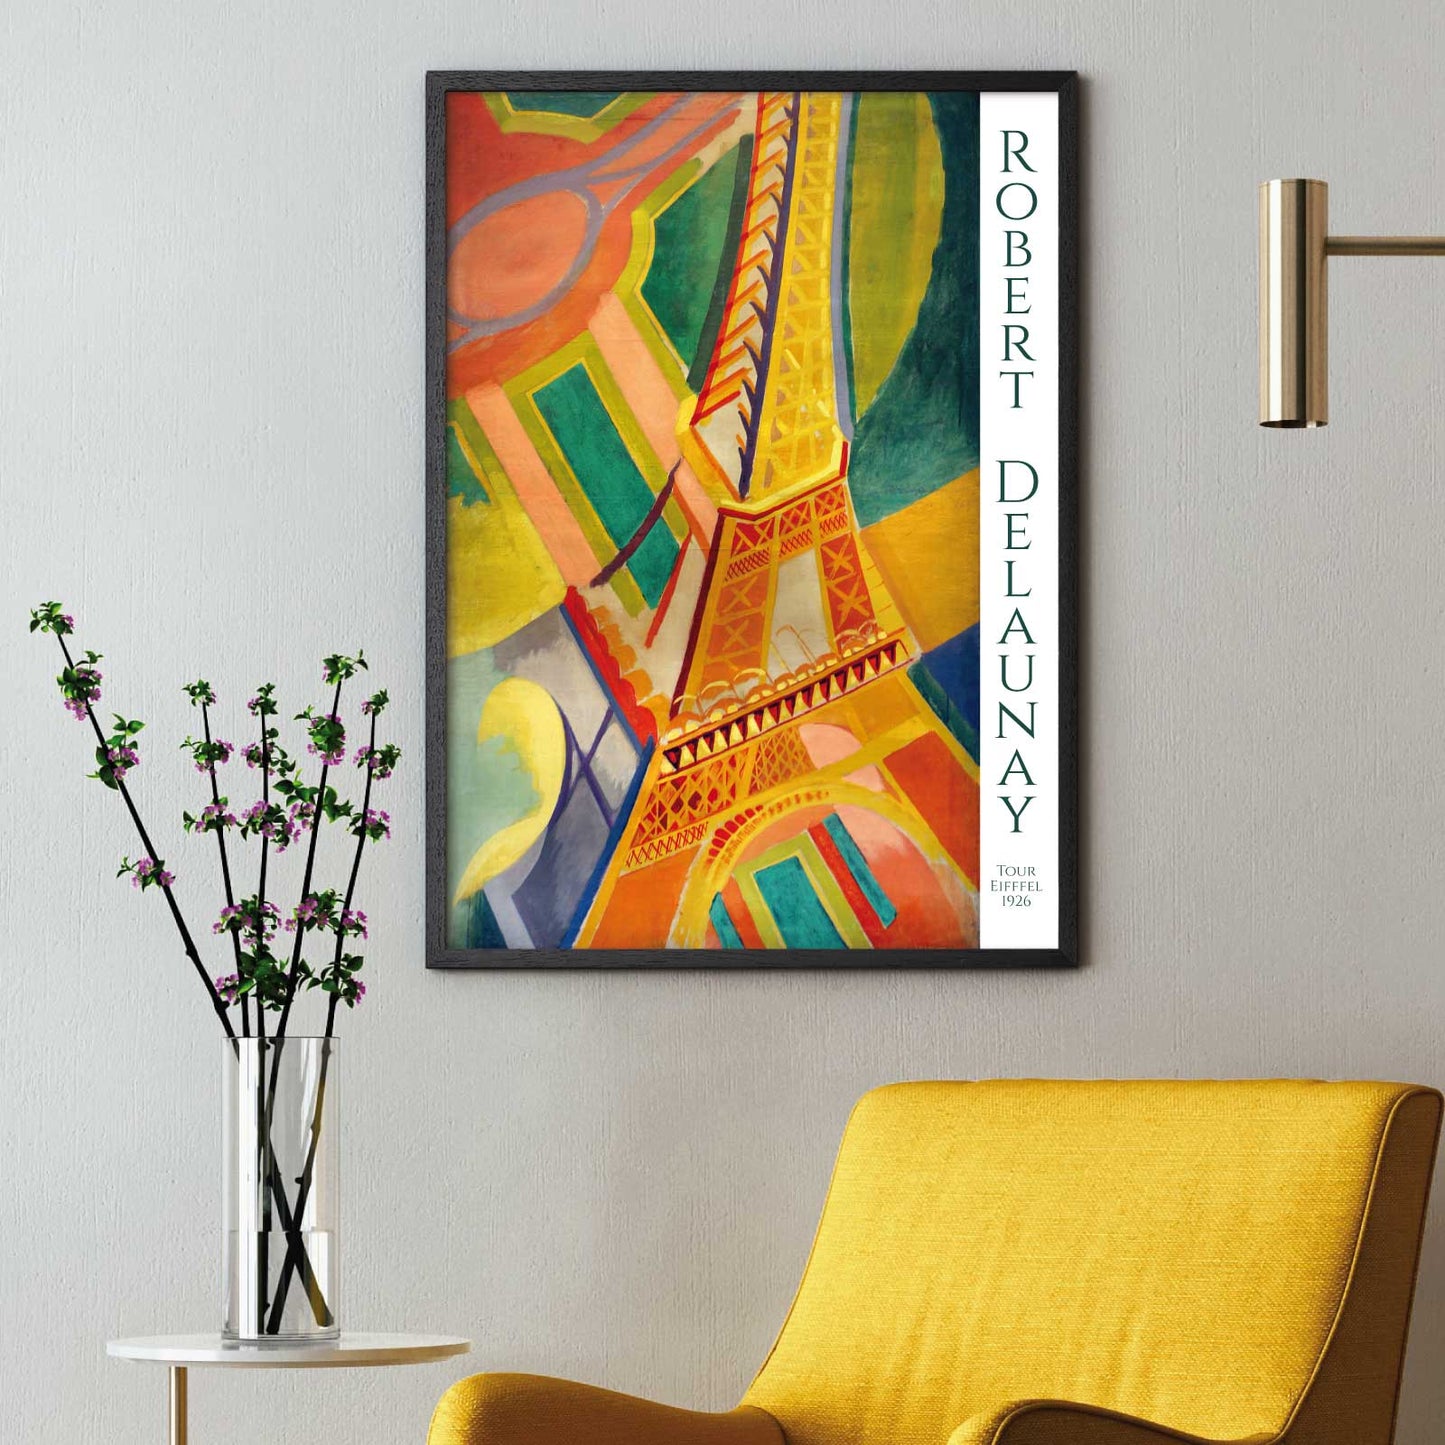 Art poster with Robert Delaunay "Tour Eiffel" from 1926